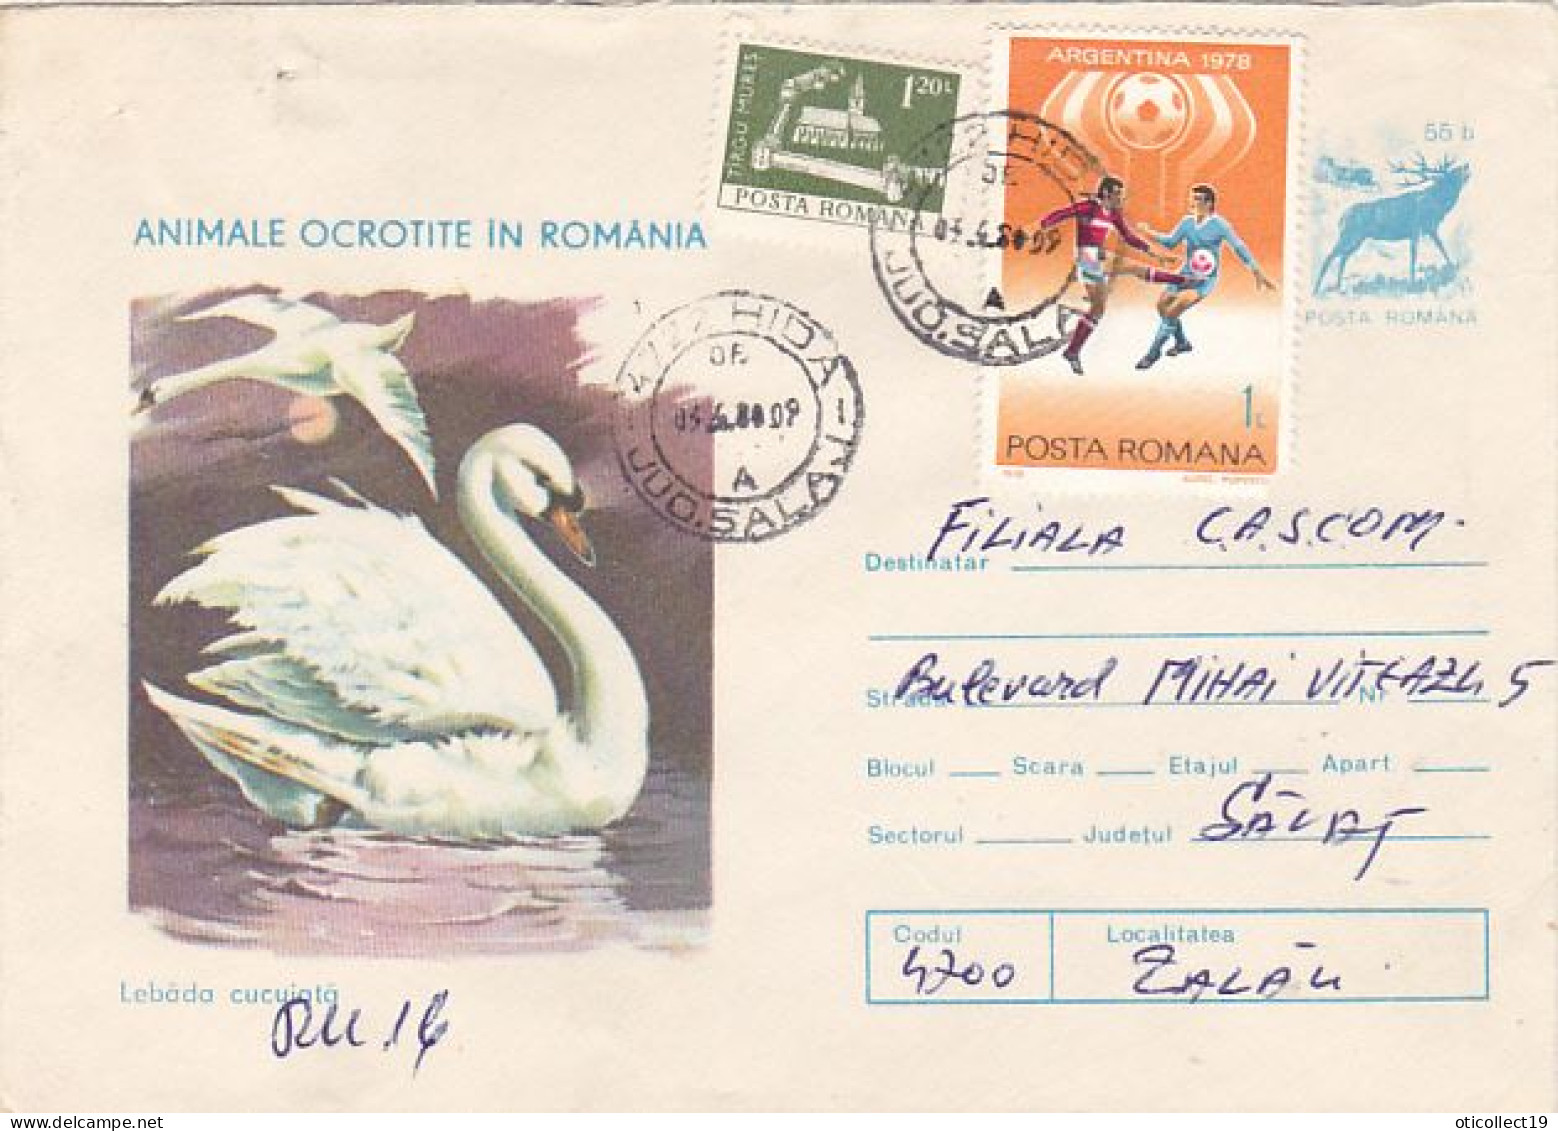 ANIMALS, BIRDS, MUTE SWAN, REGISTERED COVER STATIONERY, FINE STAMPS, 1977, ROMANIA - Cisnes